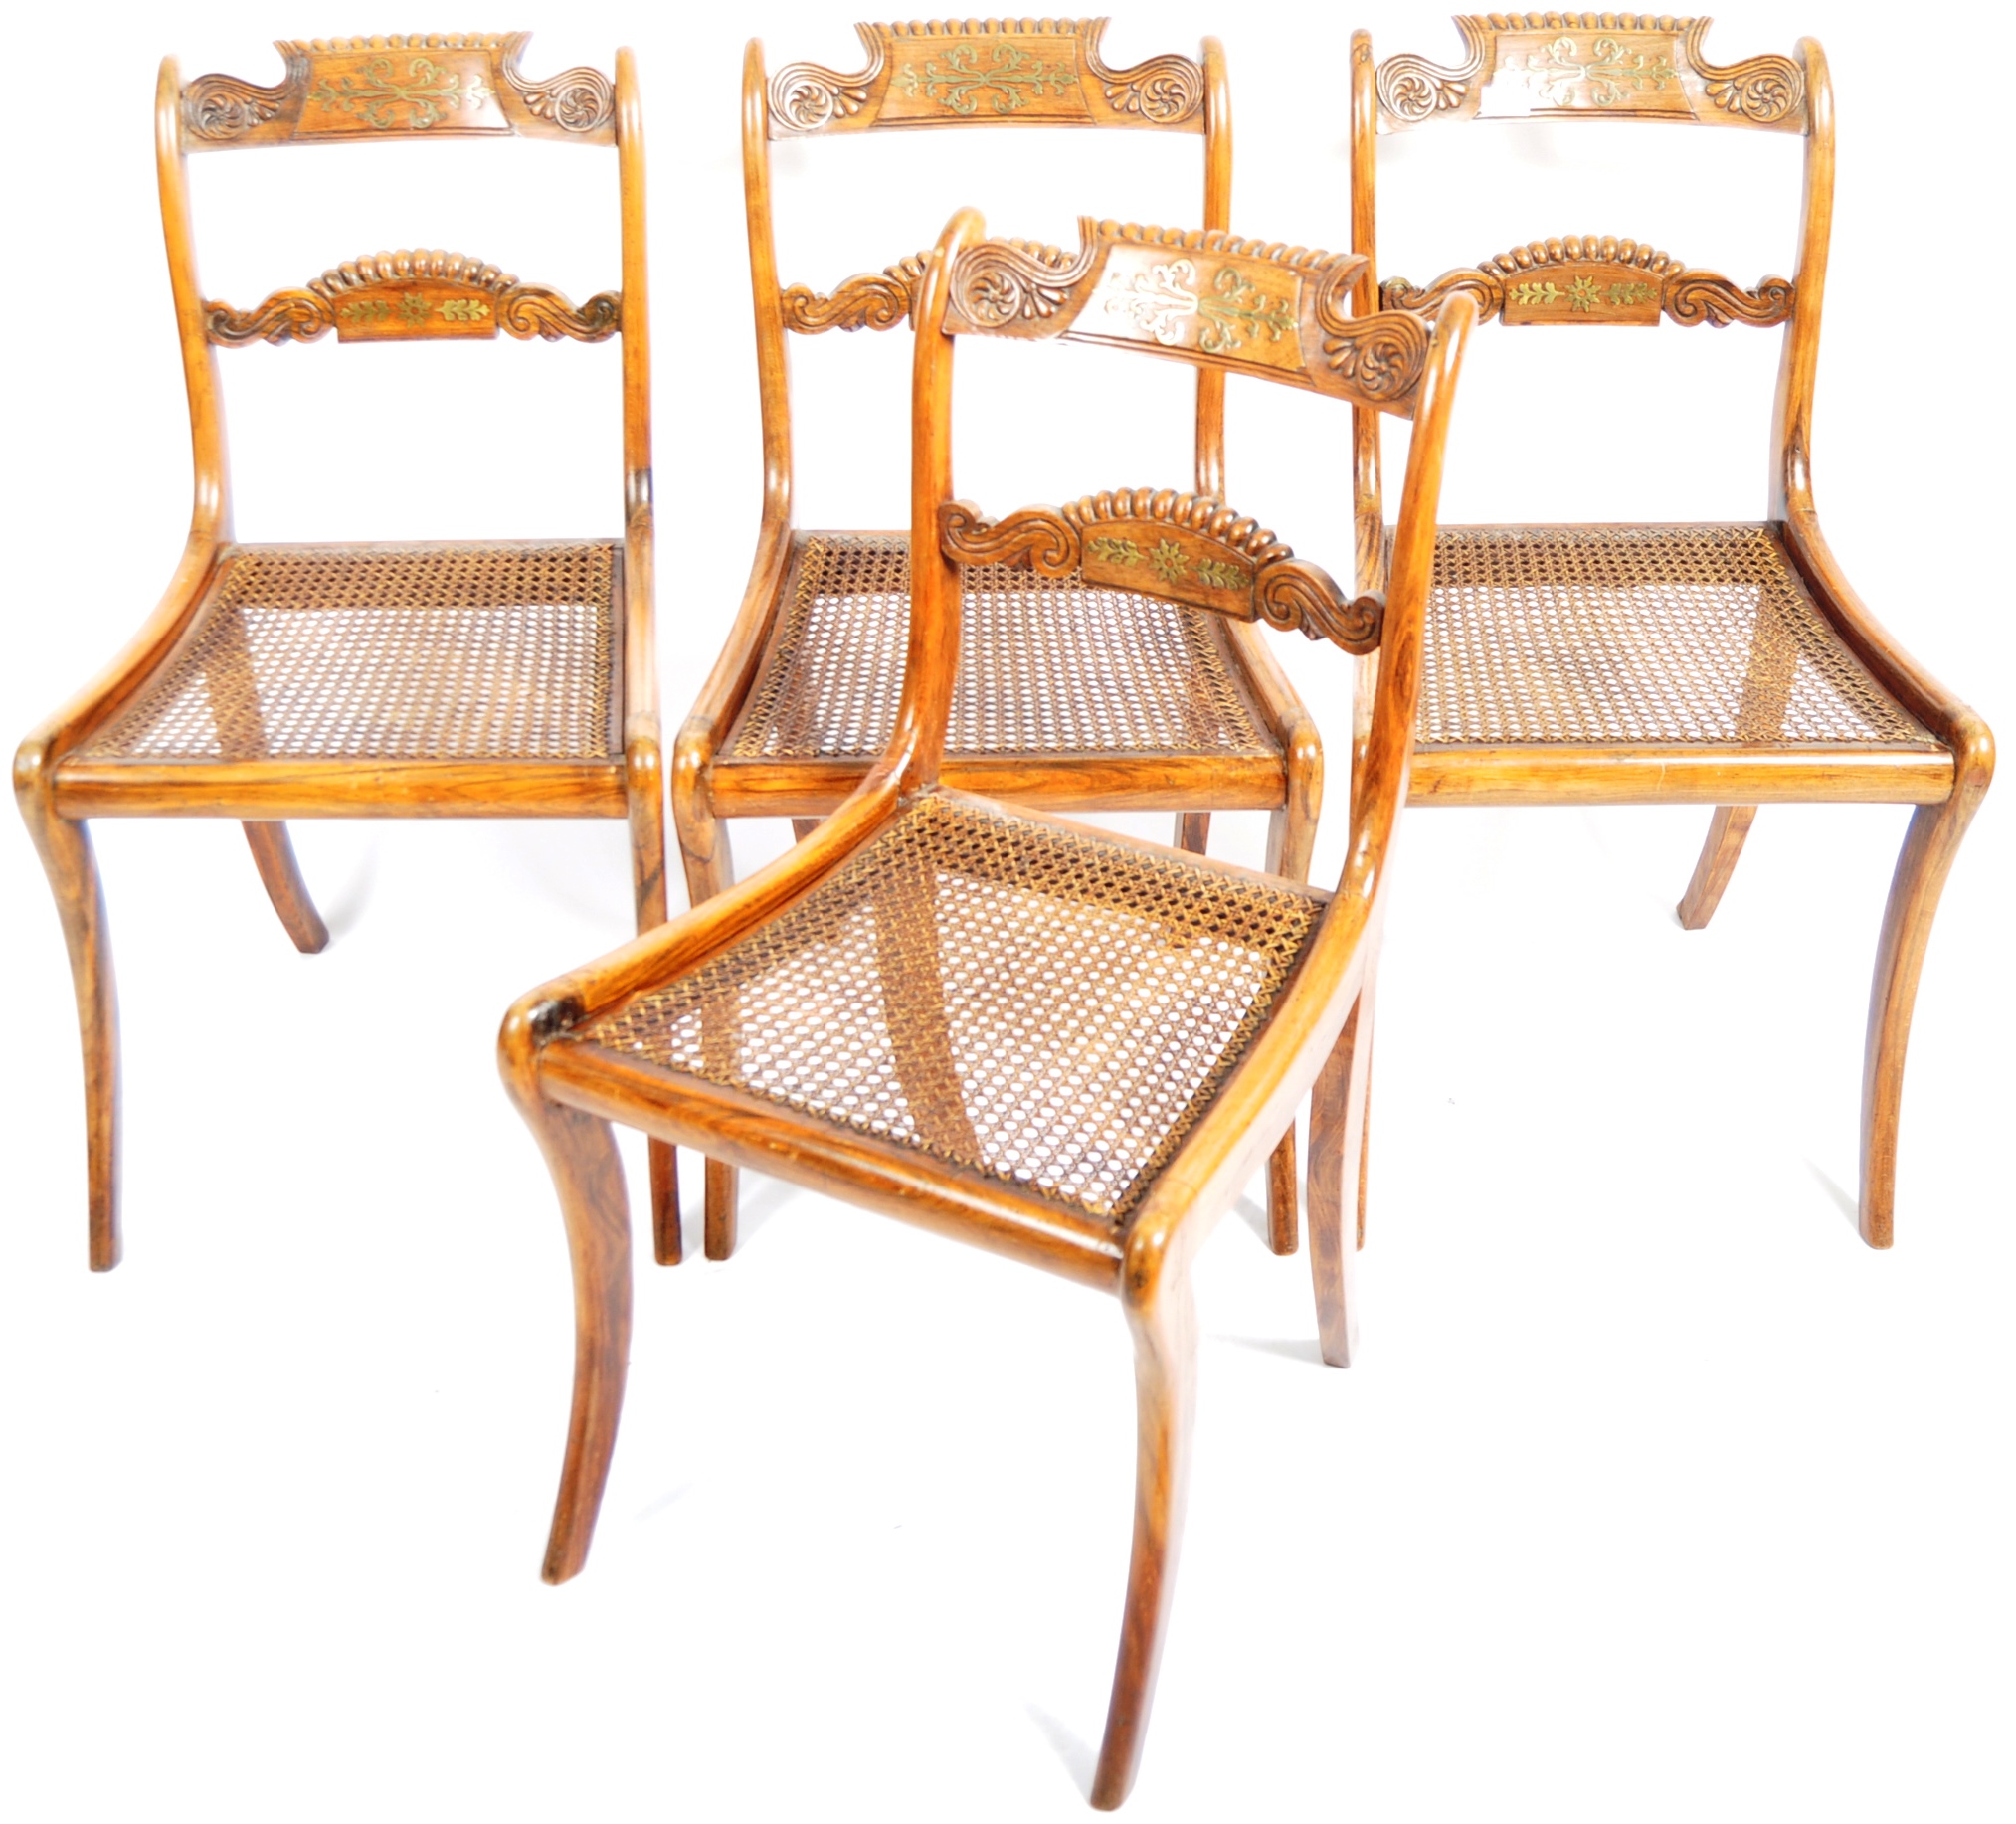 FOUR 19TH CENTURY REGENCY ROSEWOOD DINING CHAIRS - Image 2 of 8